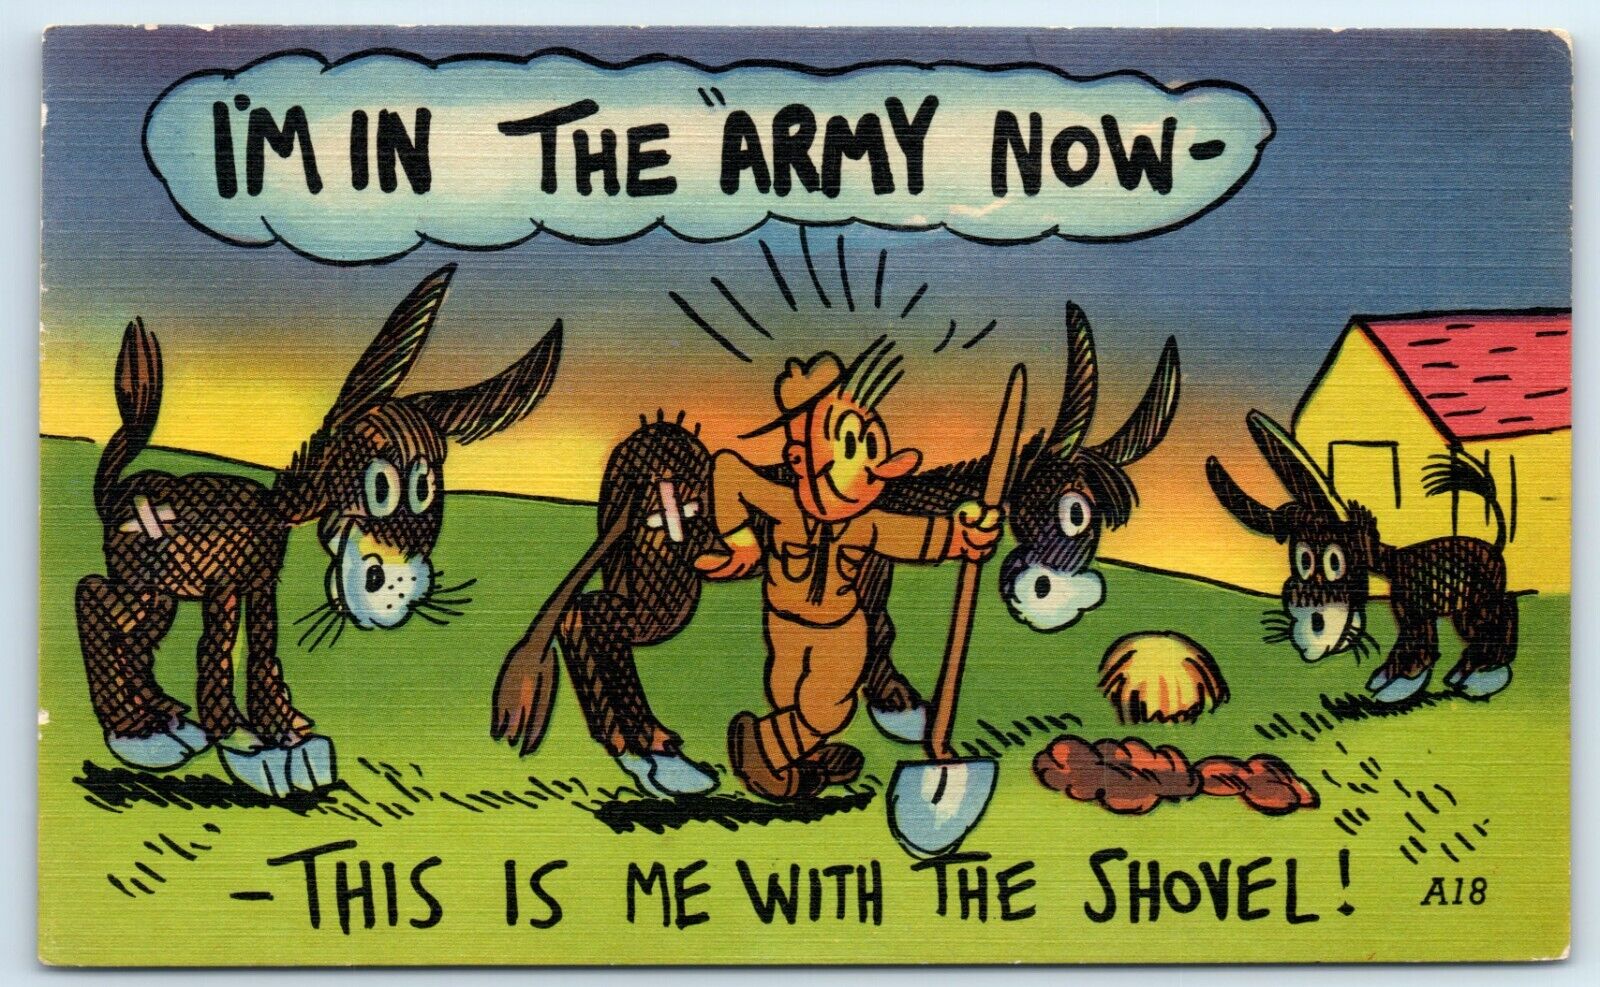 Postcard WW2 Military Comic I'm in the Army Now, This is Me with Shovel A18 G103